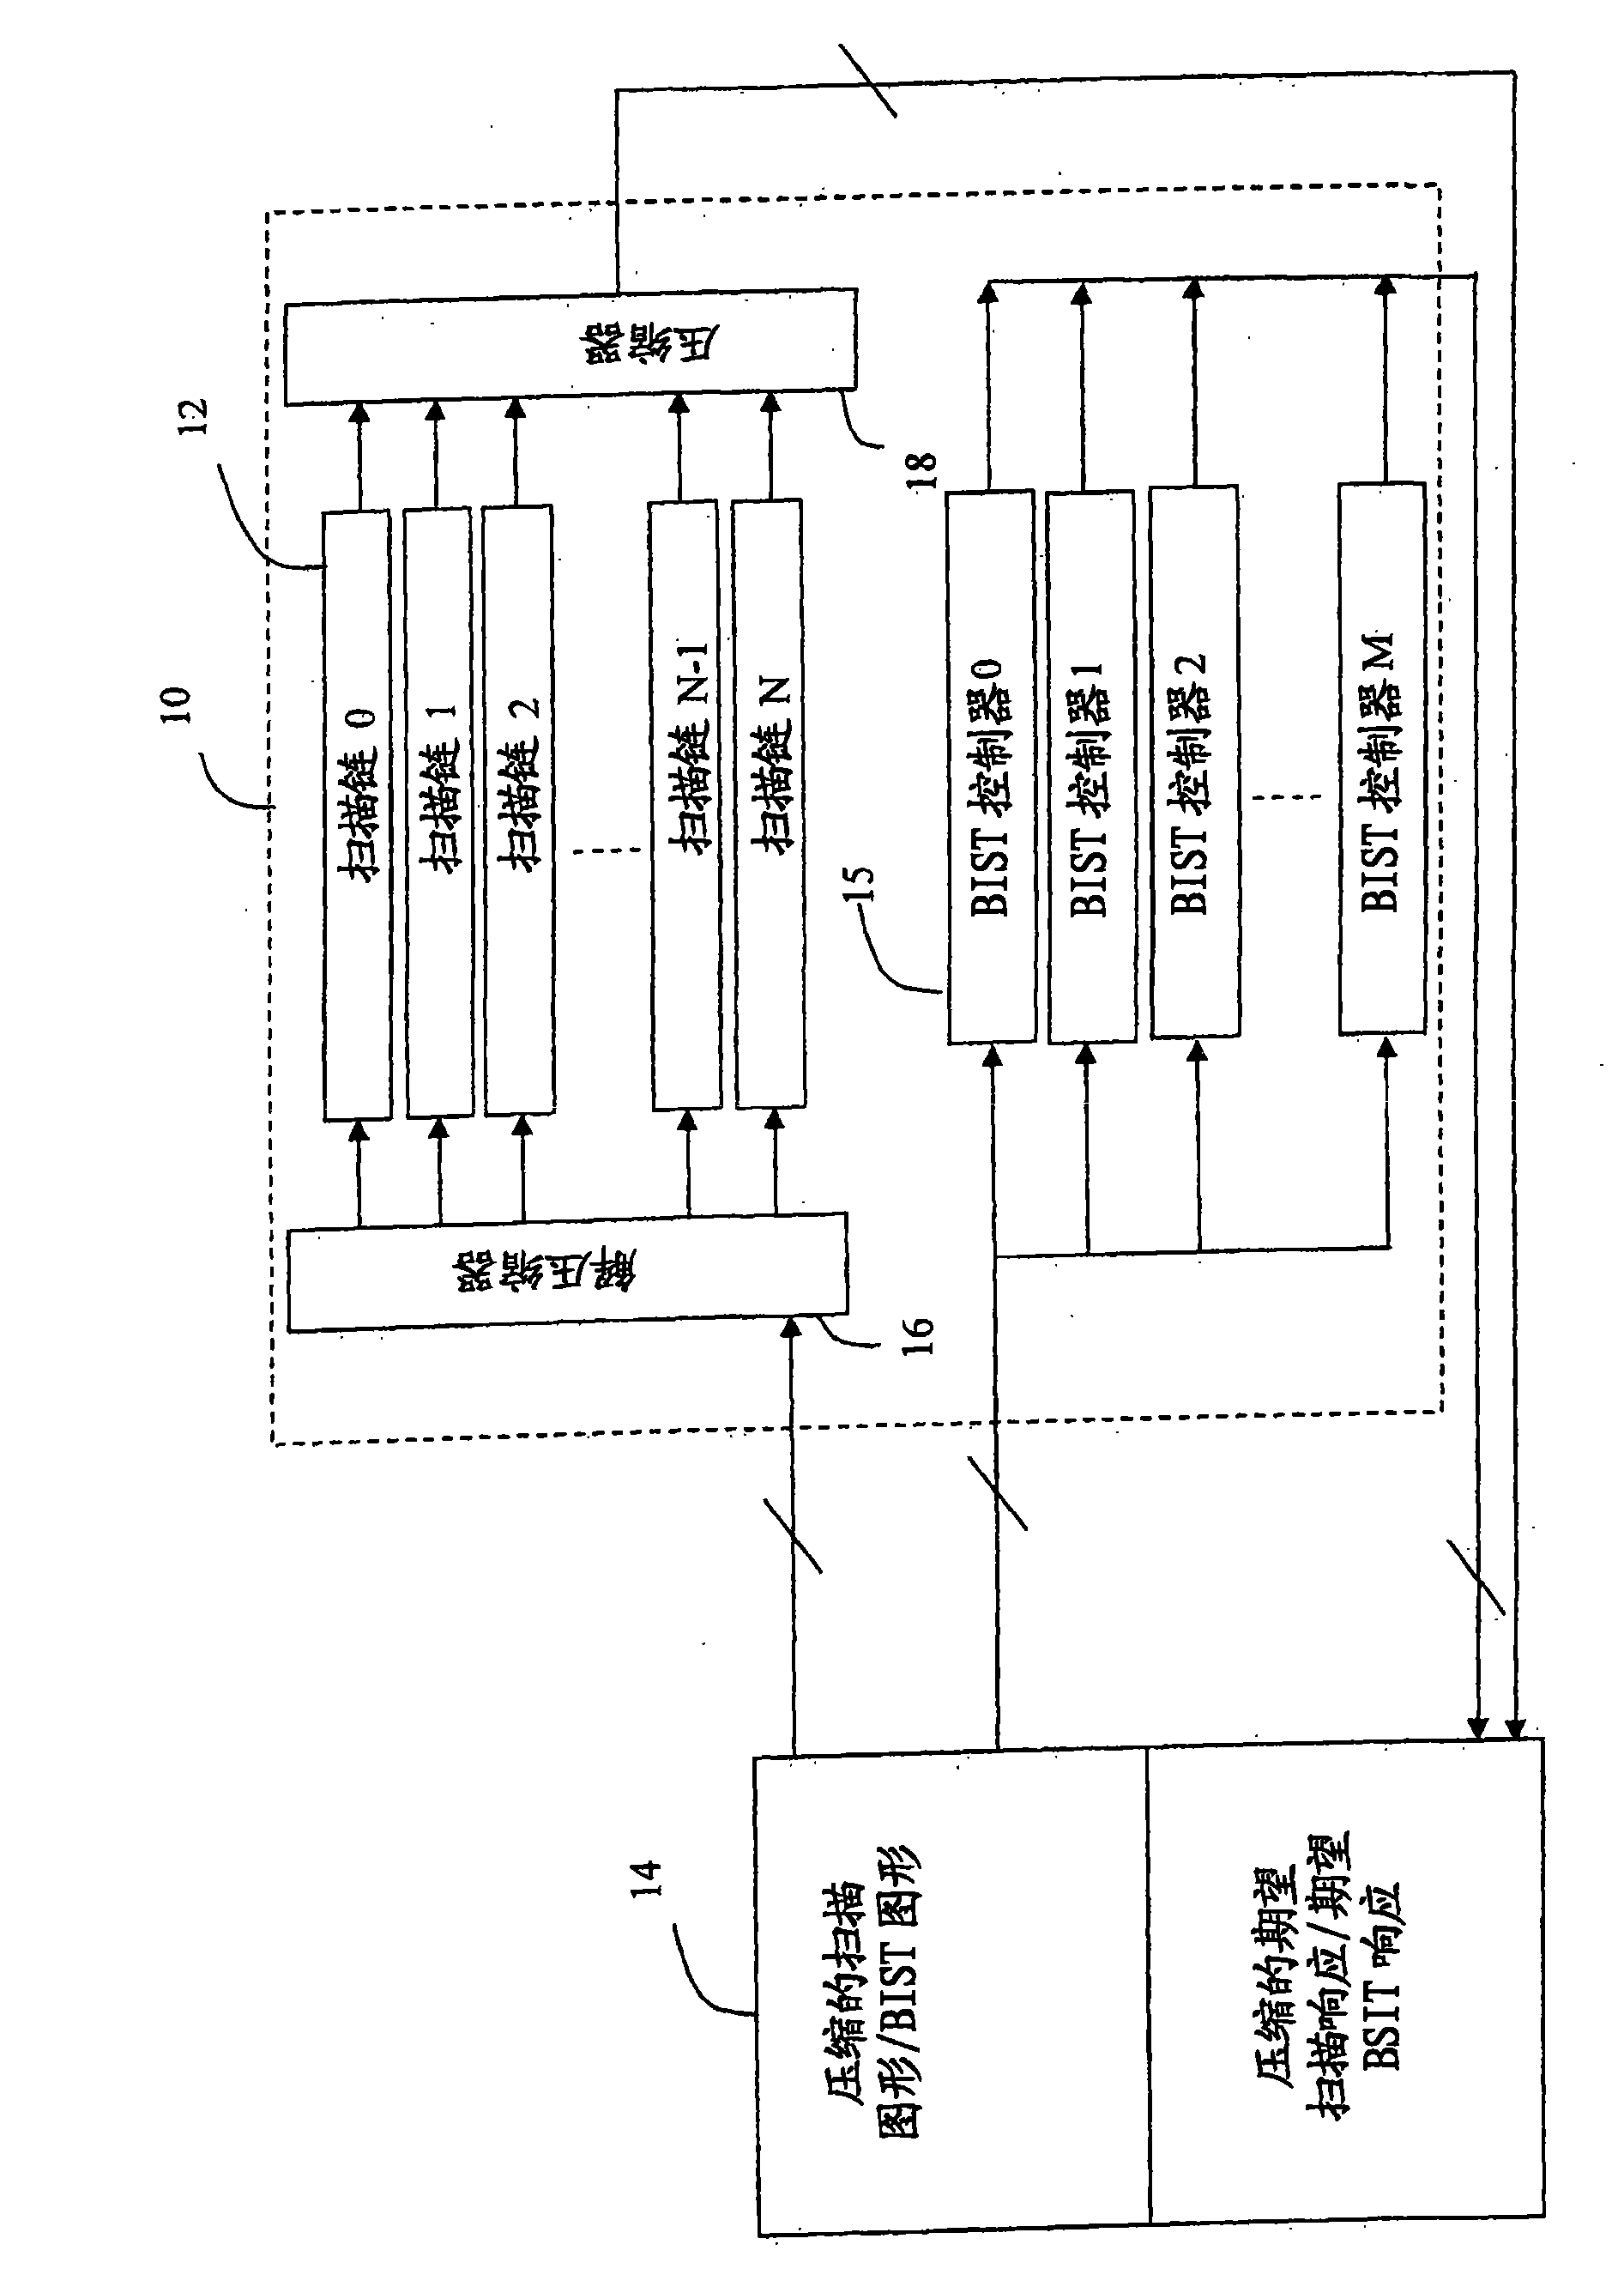 System and method for executing scan test